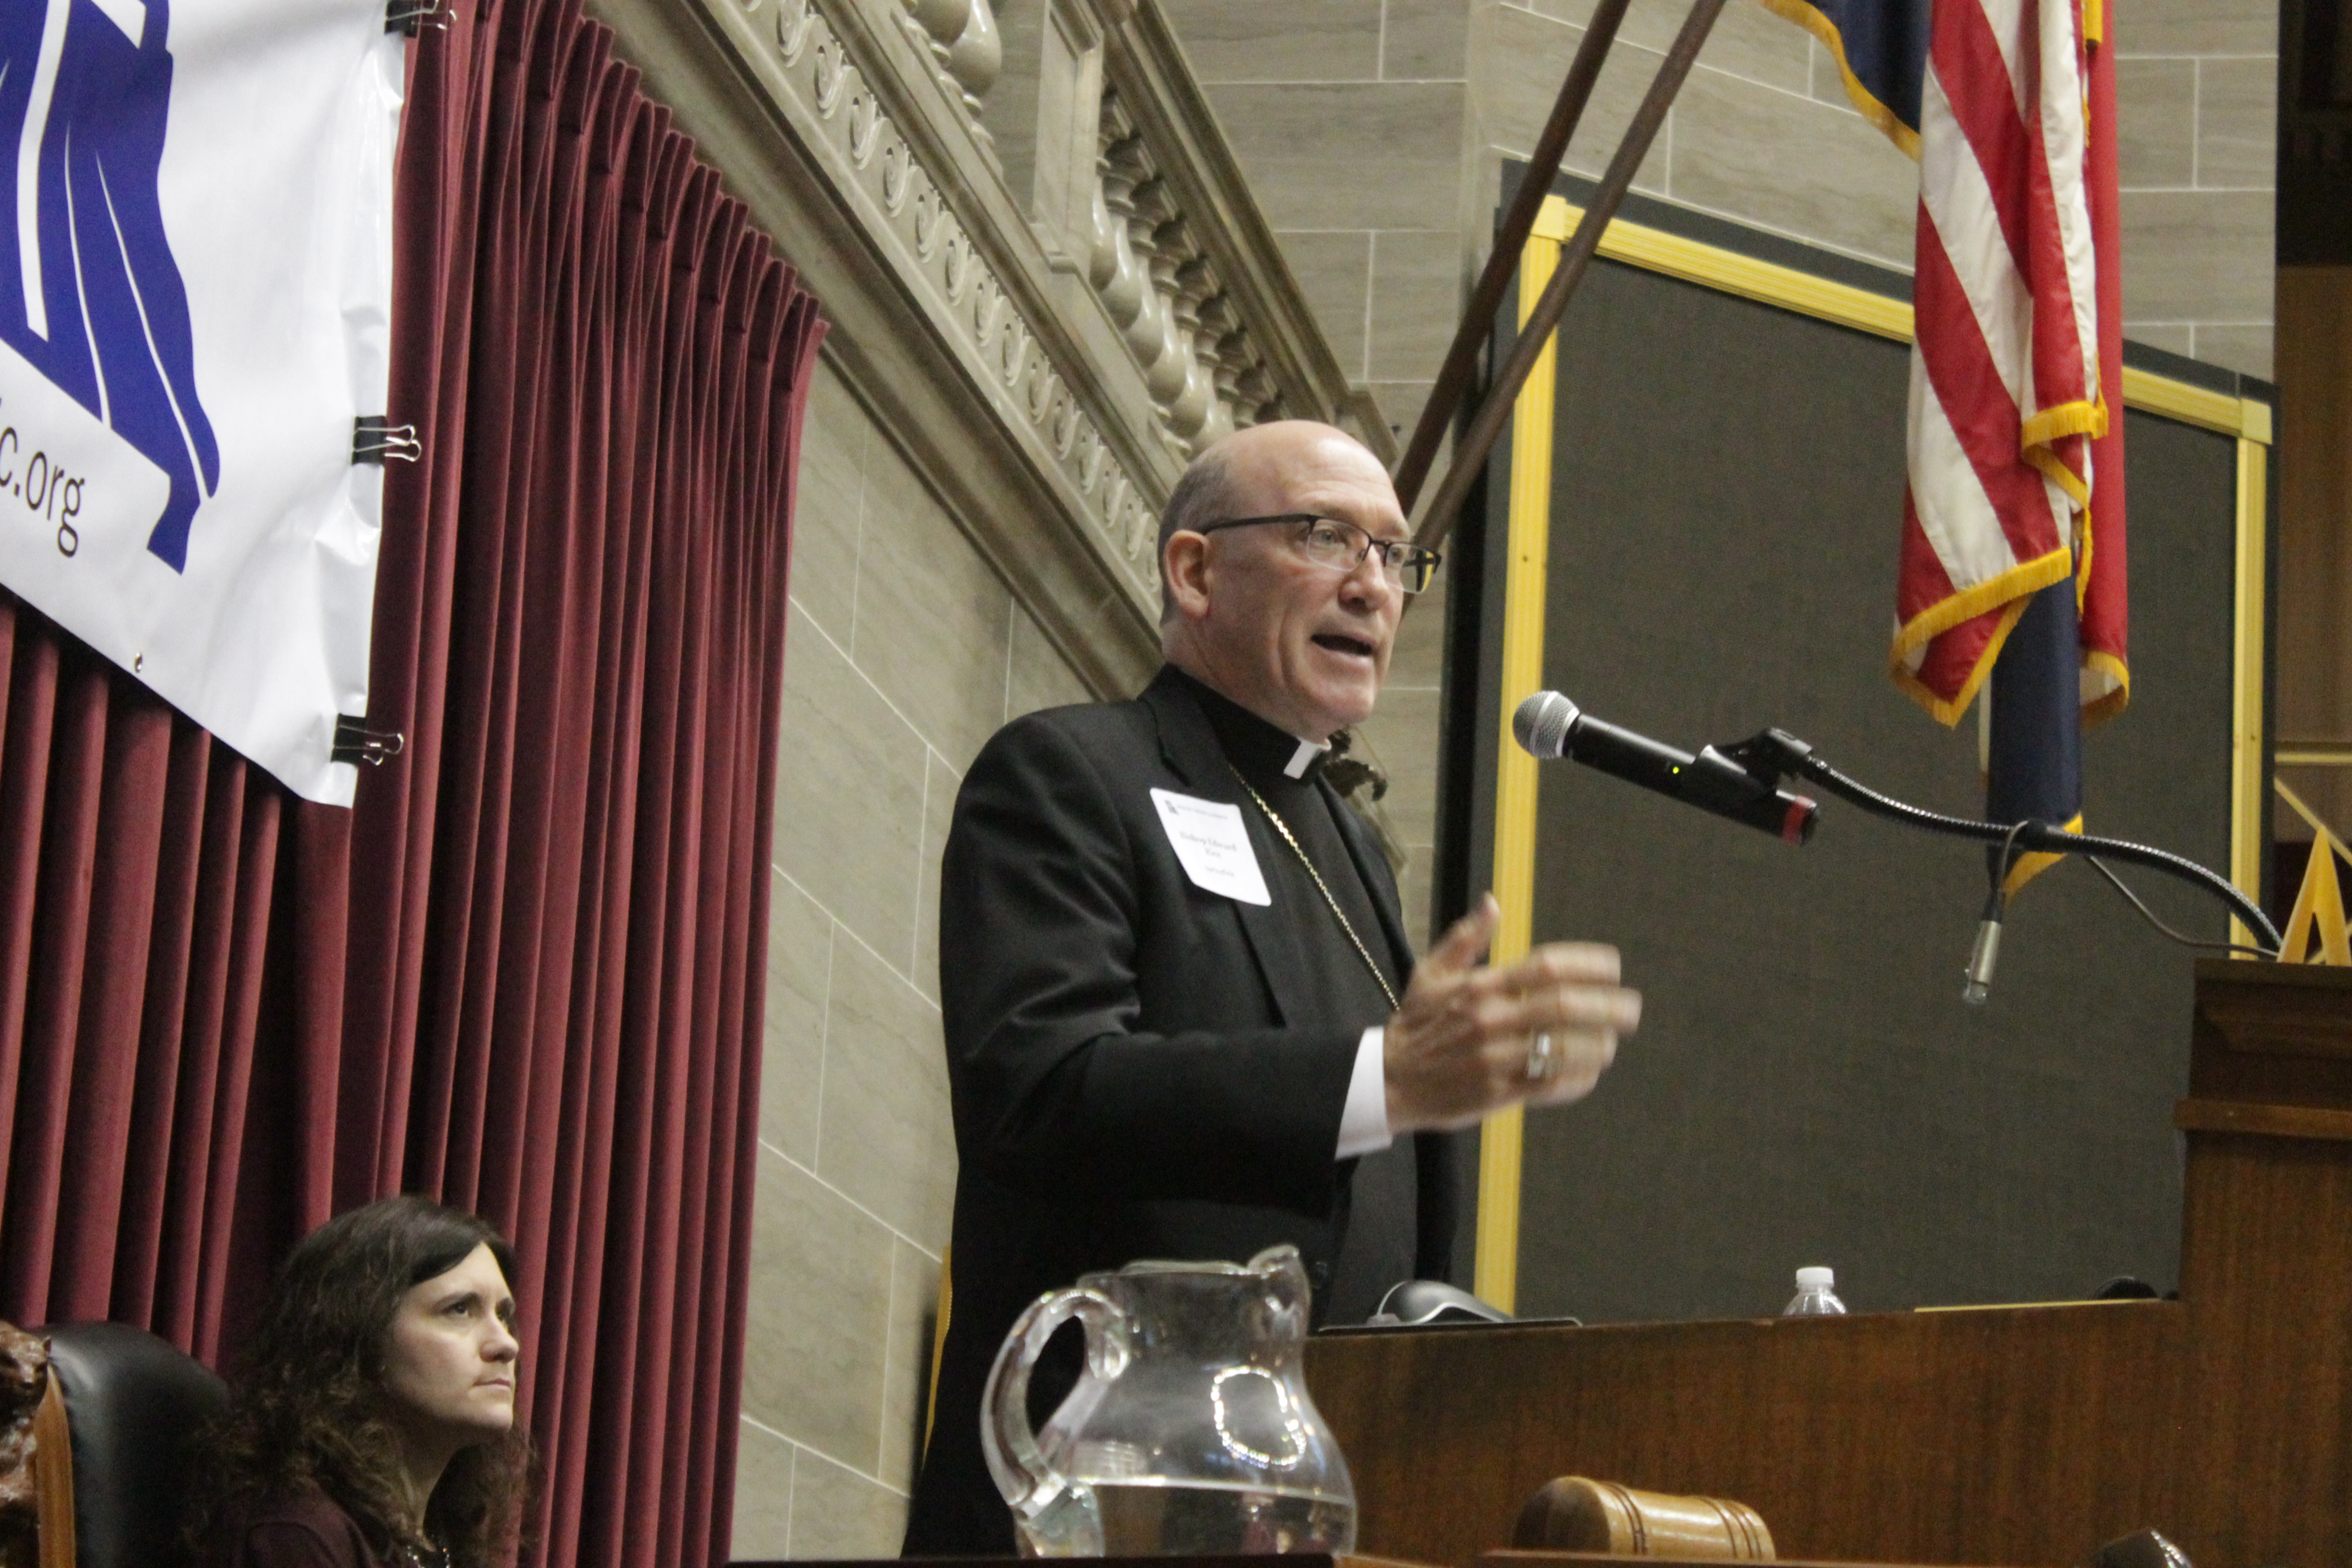 Bishop Edward M. Rice of Springfield-Cape Girardeau, Mo., speaks in the House chamber of the Missouri Capitol in Jefferson City Oct. 8. Bishop Rice addressed 400 Catholics from all over the state at the Missouri Catholic Conference's annual assembly. (CNS photo/Jay Nies, Catholic Missourian)